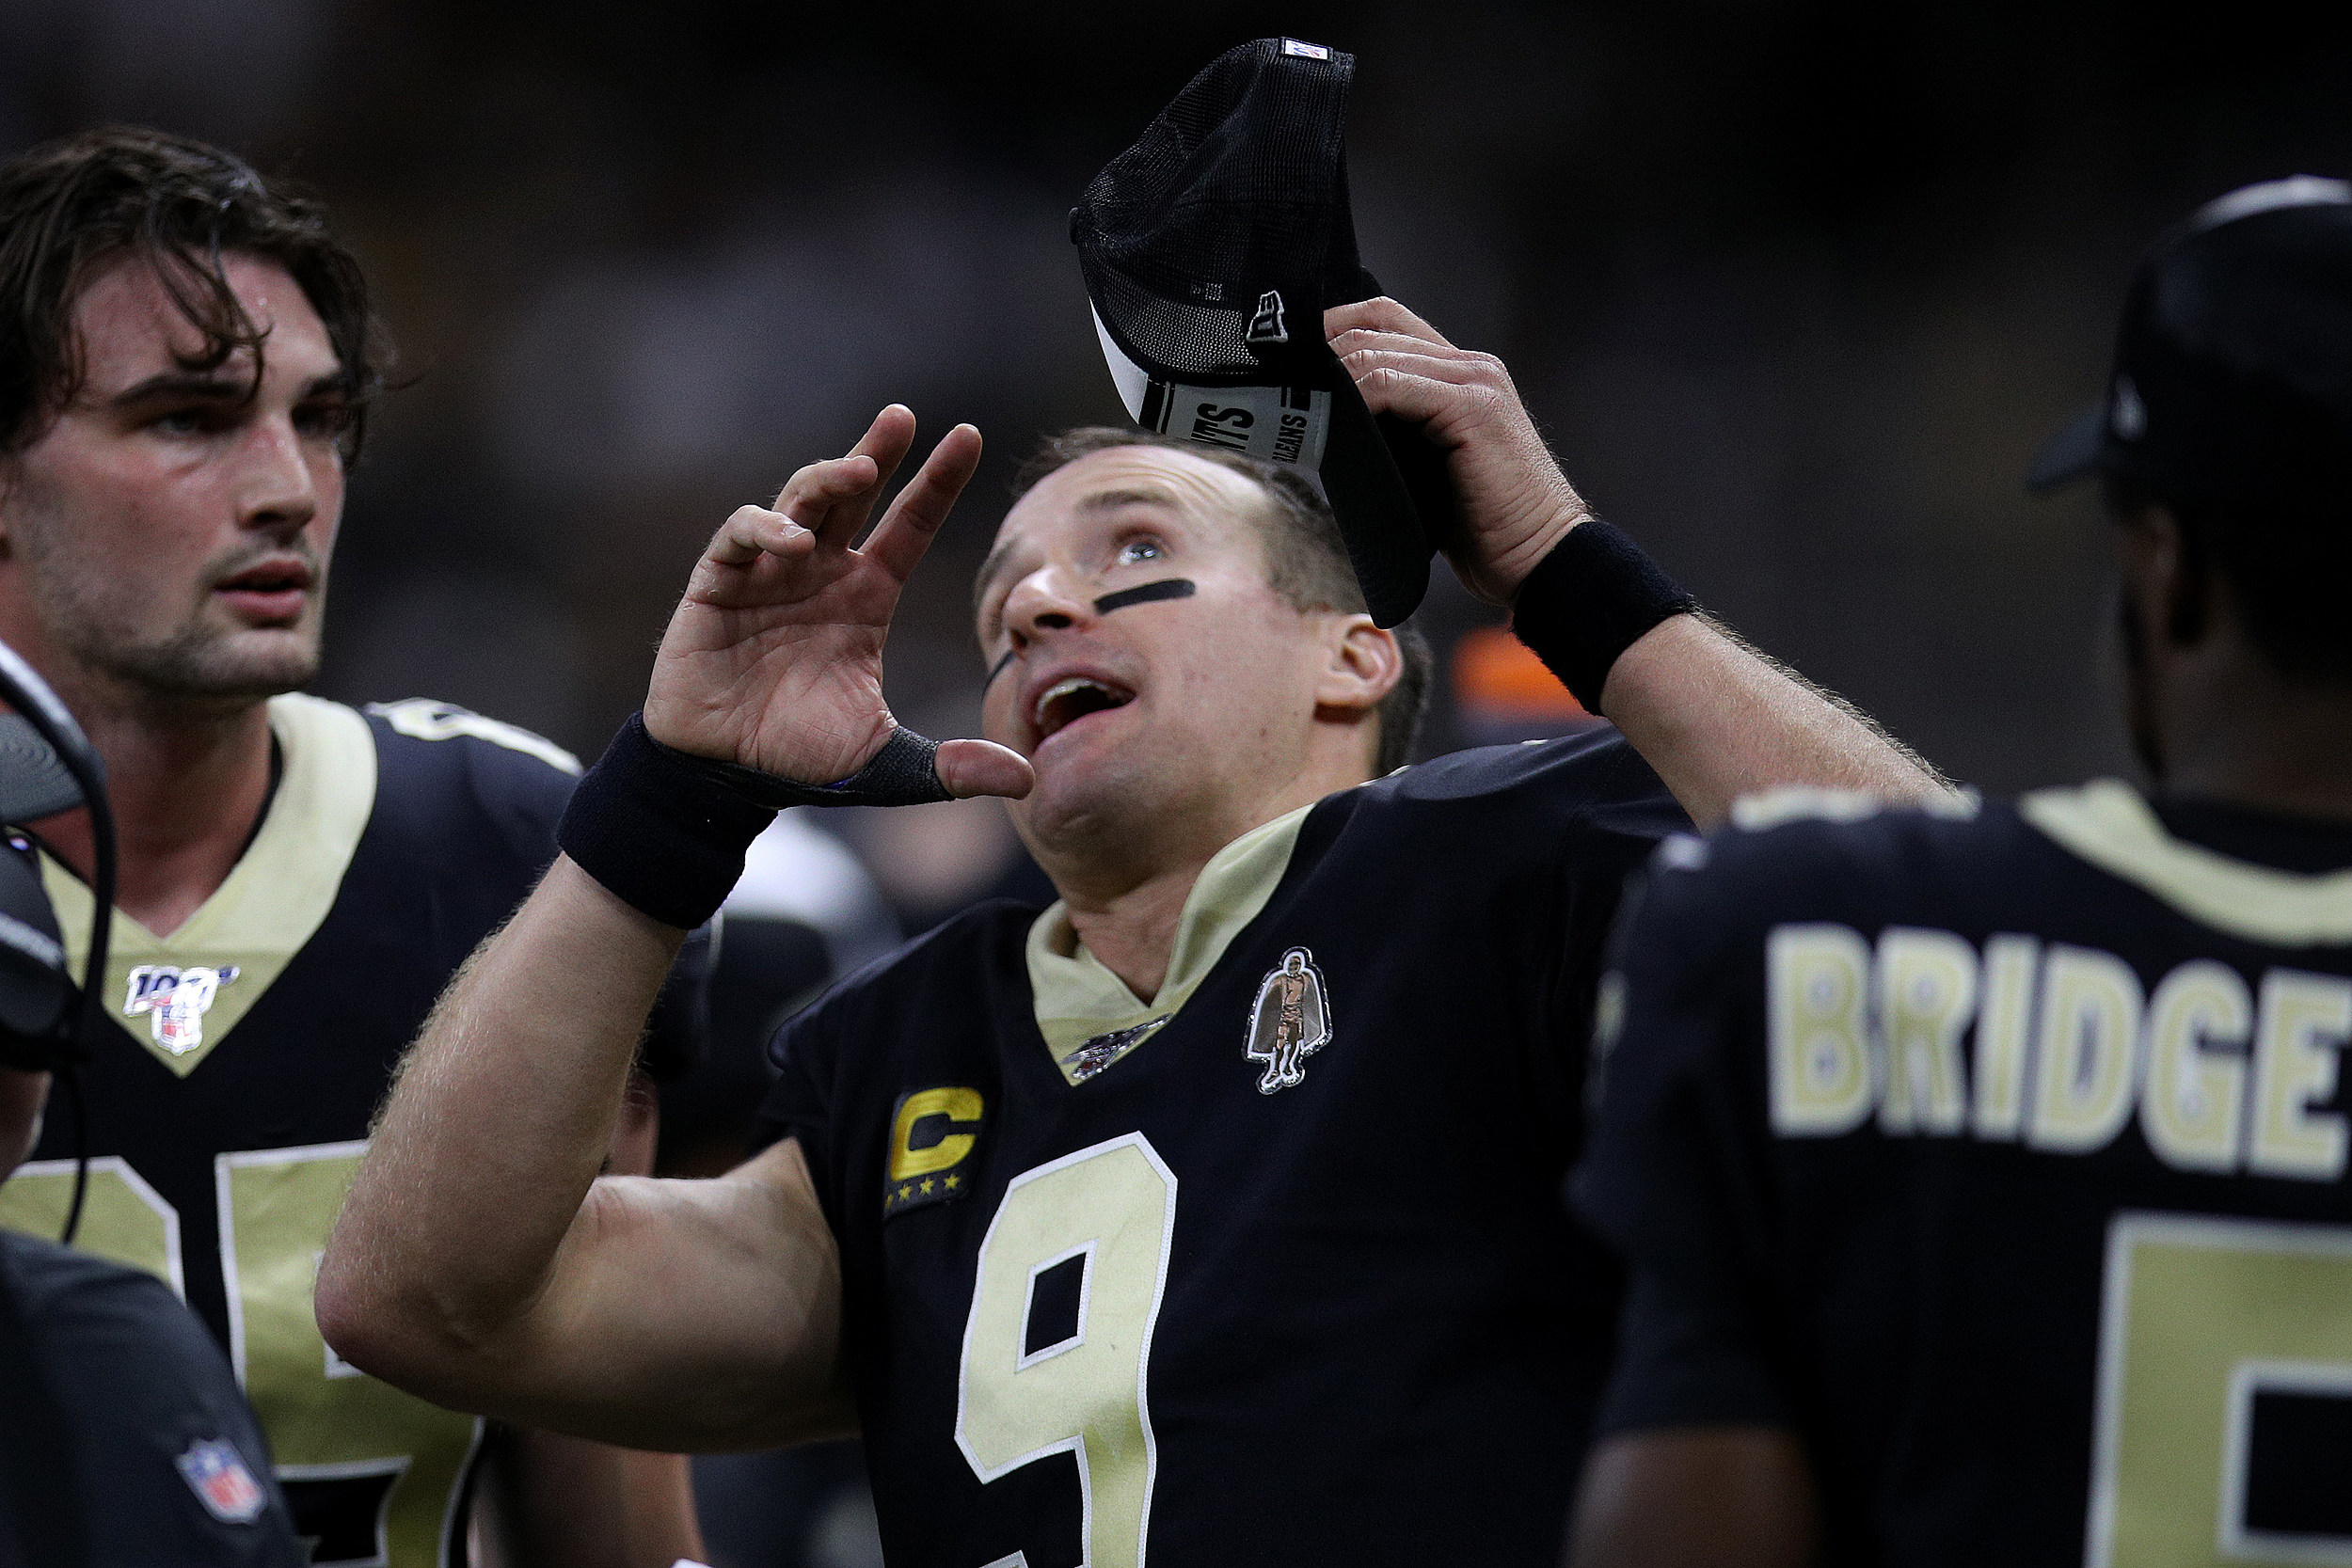 Drew Brees To Be Featured 'Undercover Boss'